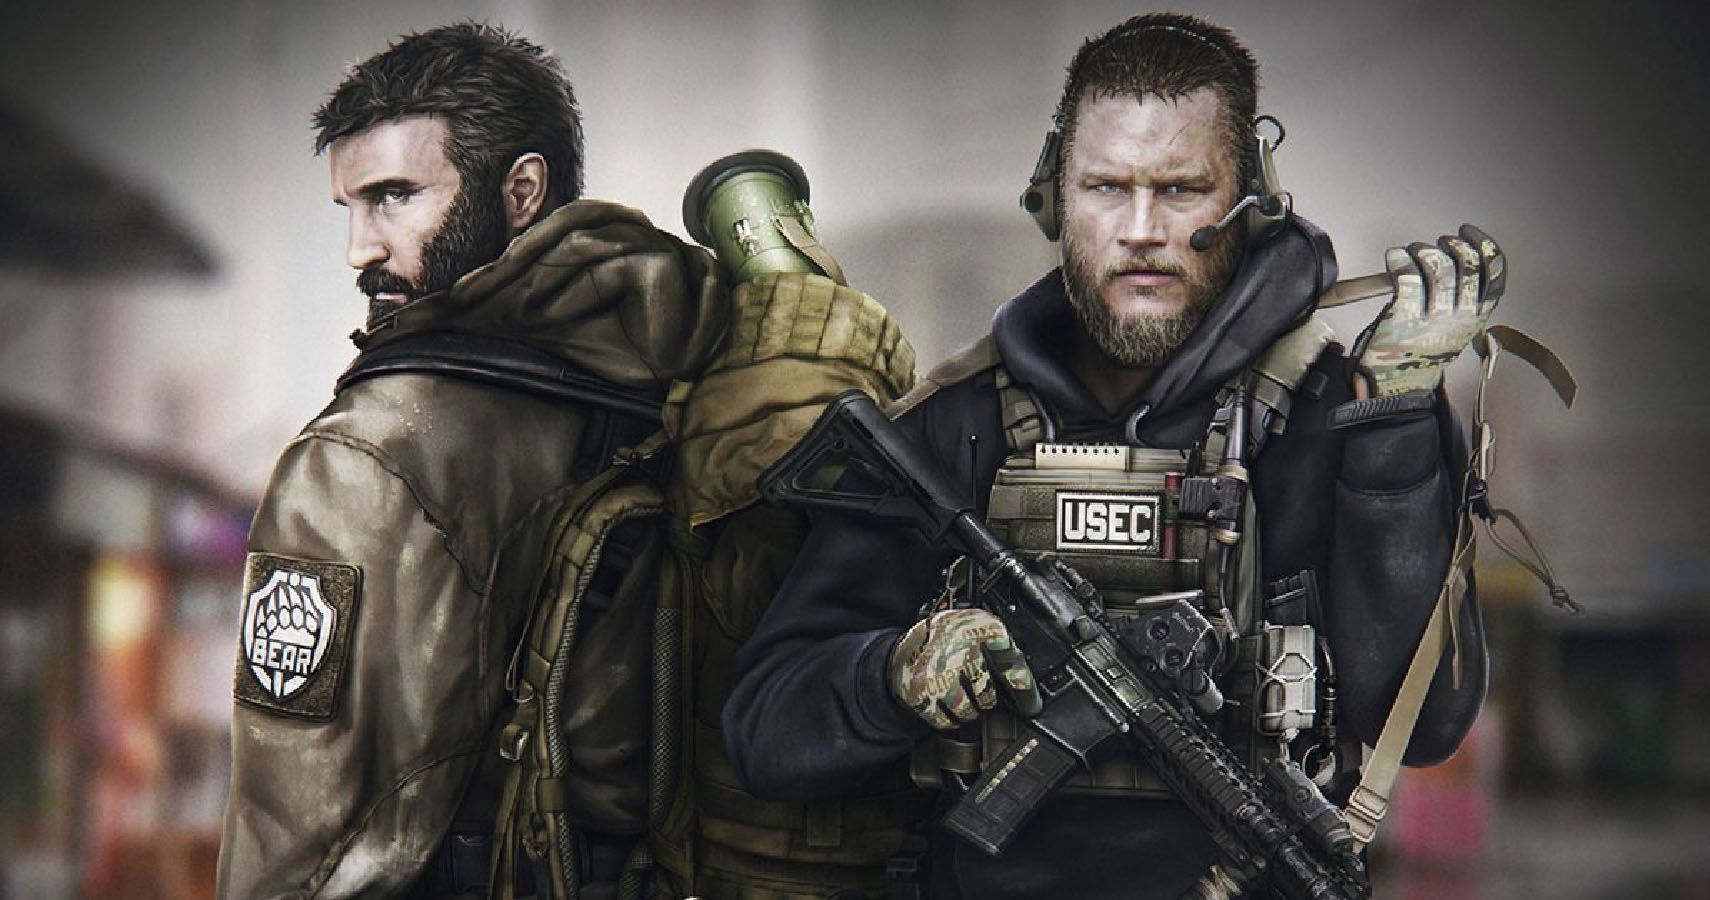 Escape From Tarkov for PC. Promotional image of a soldier from both factions.